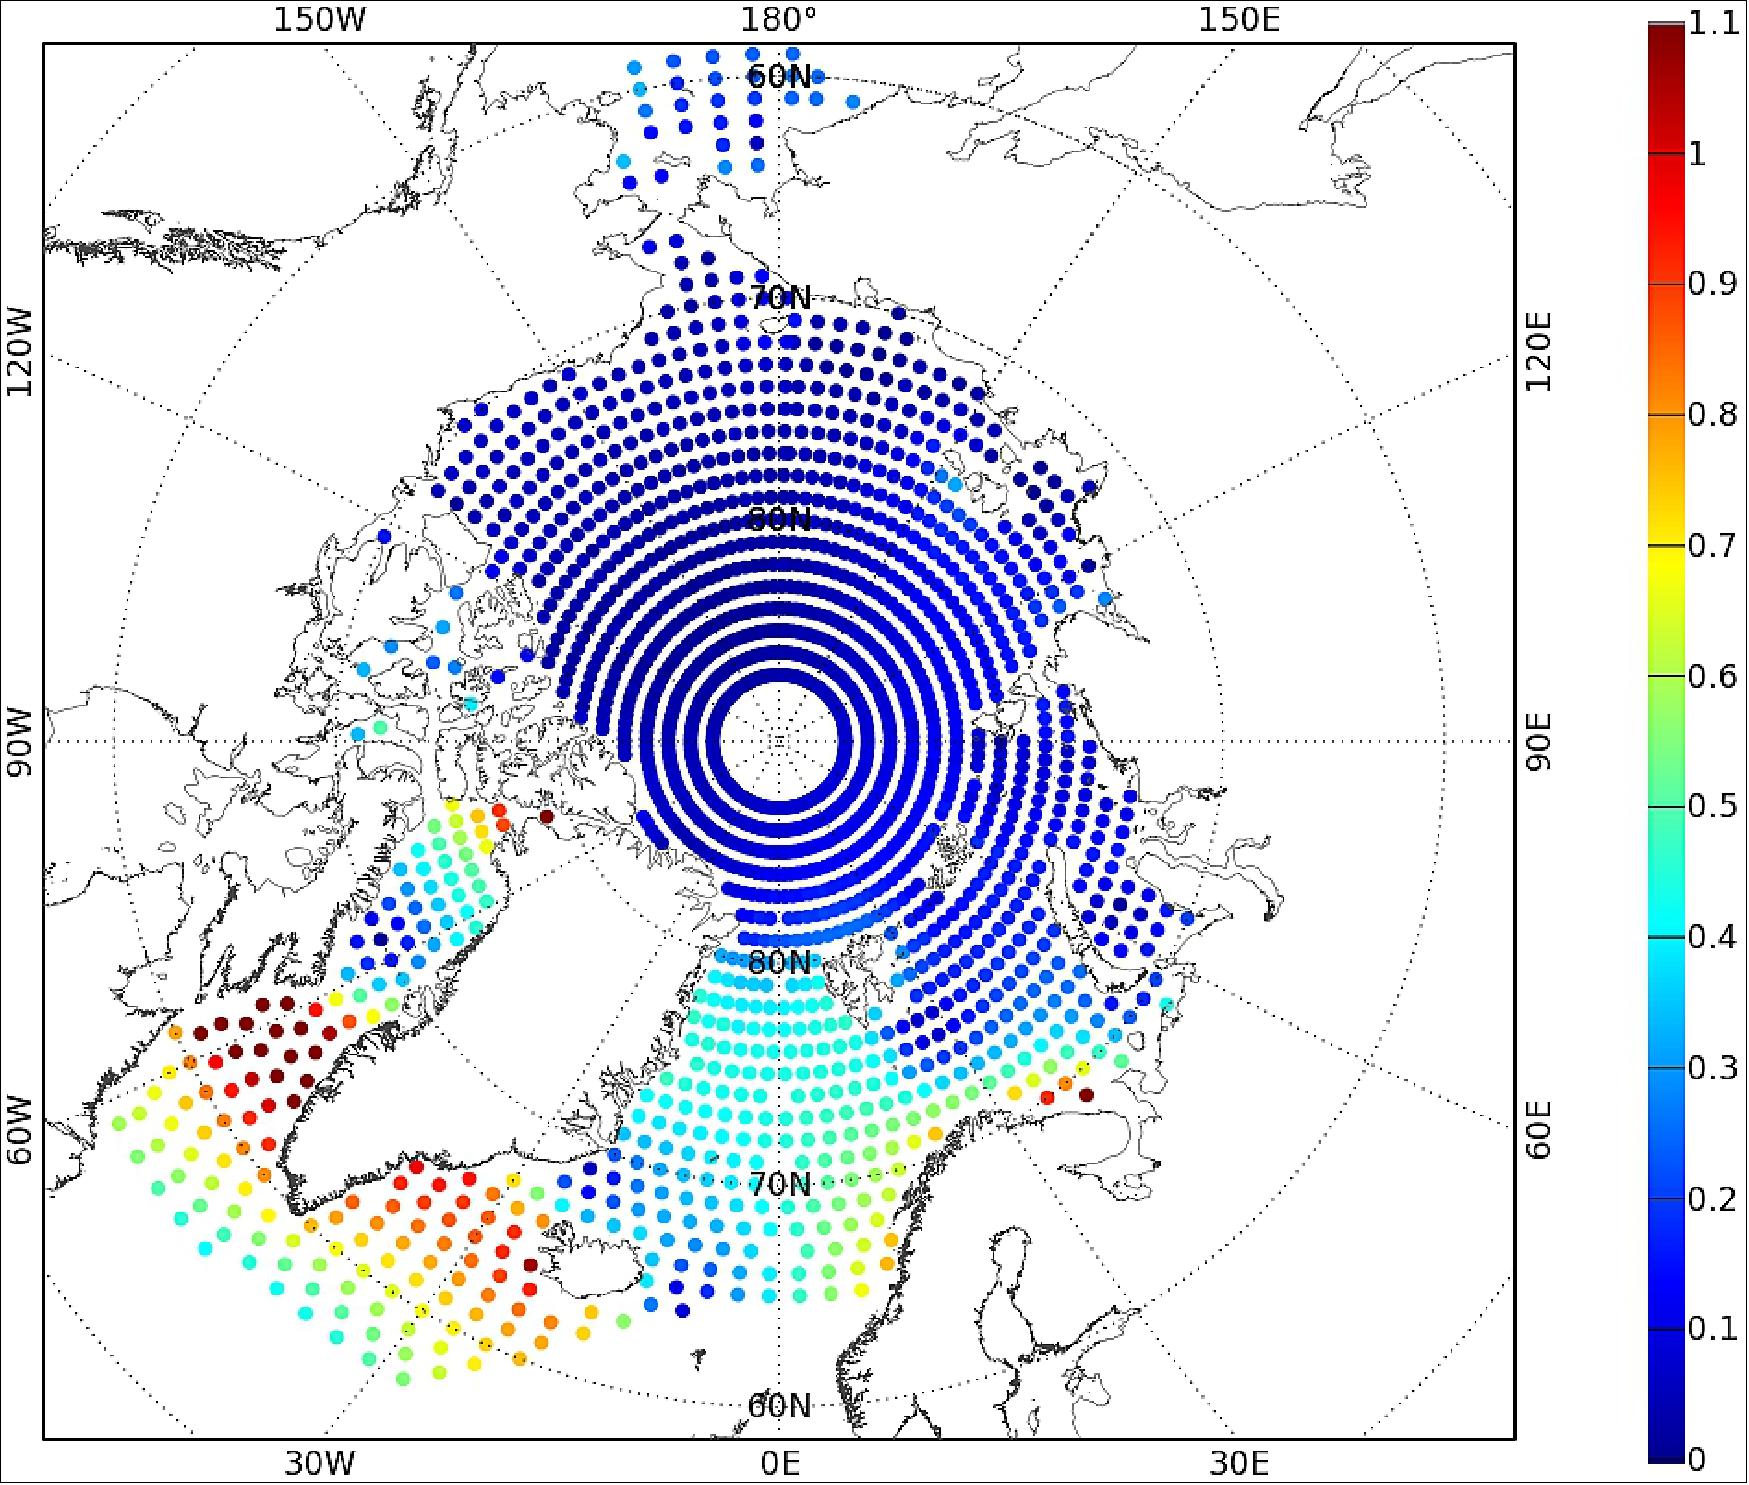 Figure 40: Amplitude of the main tidal component in the Arctic Ocean. Amplitude (in m) of the main semi-diurnal tidal component (M2) estimated from satellite altimetry observations. Altimetry observations projected on a 1º x 3º grid in the Arctic Ocean to retrieve the ocean tide information. The data assimilation was performed using satellite altimetry observations from the Envisat and CryoSat-2 missions processed by DTU Space in order to estimate the ocean tides from the altimeter sea surface height (image credit: DTU Space/NOVELTIS)